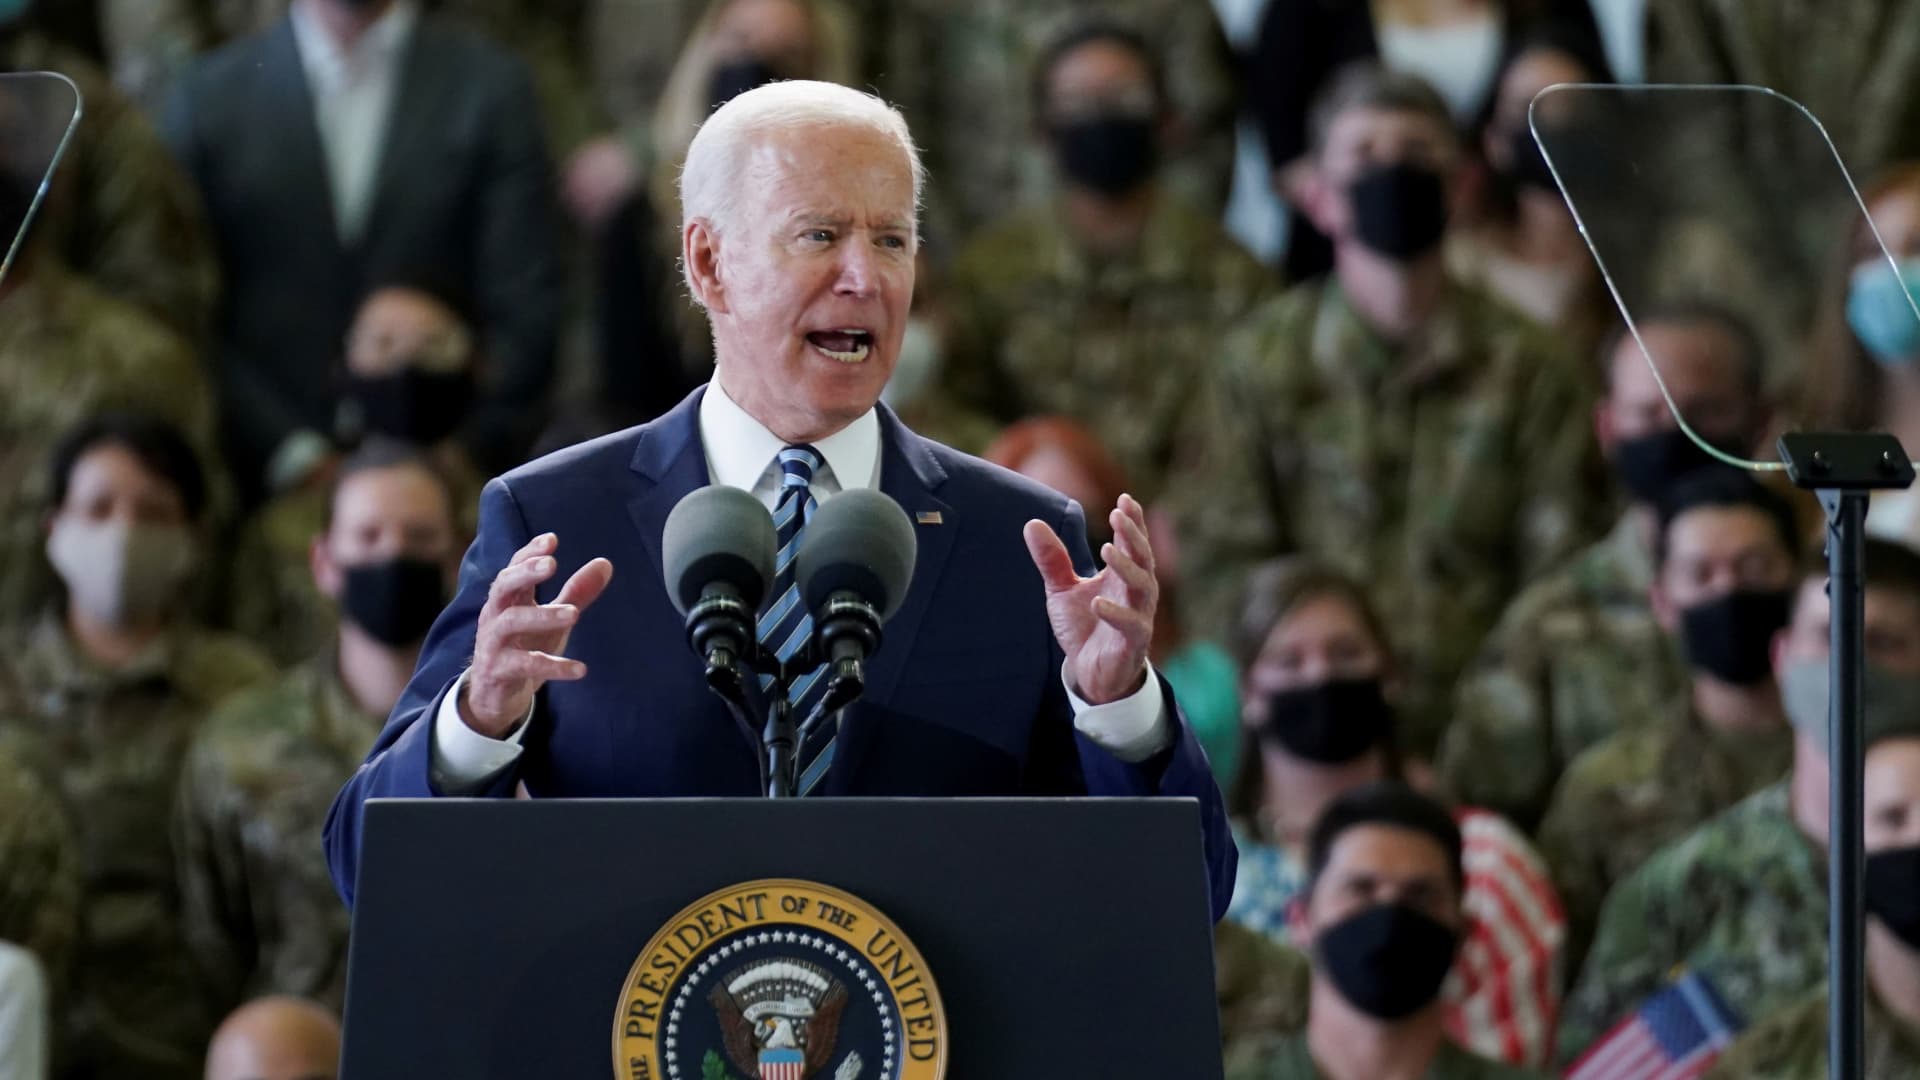 U.S. President Joe Biden delivers remarks to U.S. Air Force personnel and their families stationed at RAF Mildenhall, ahead of the G7 Summit, near Mildenhall, Britain June 9, 2021.